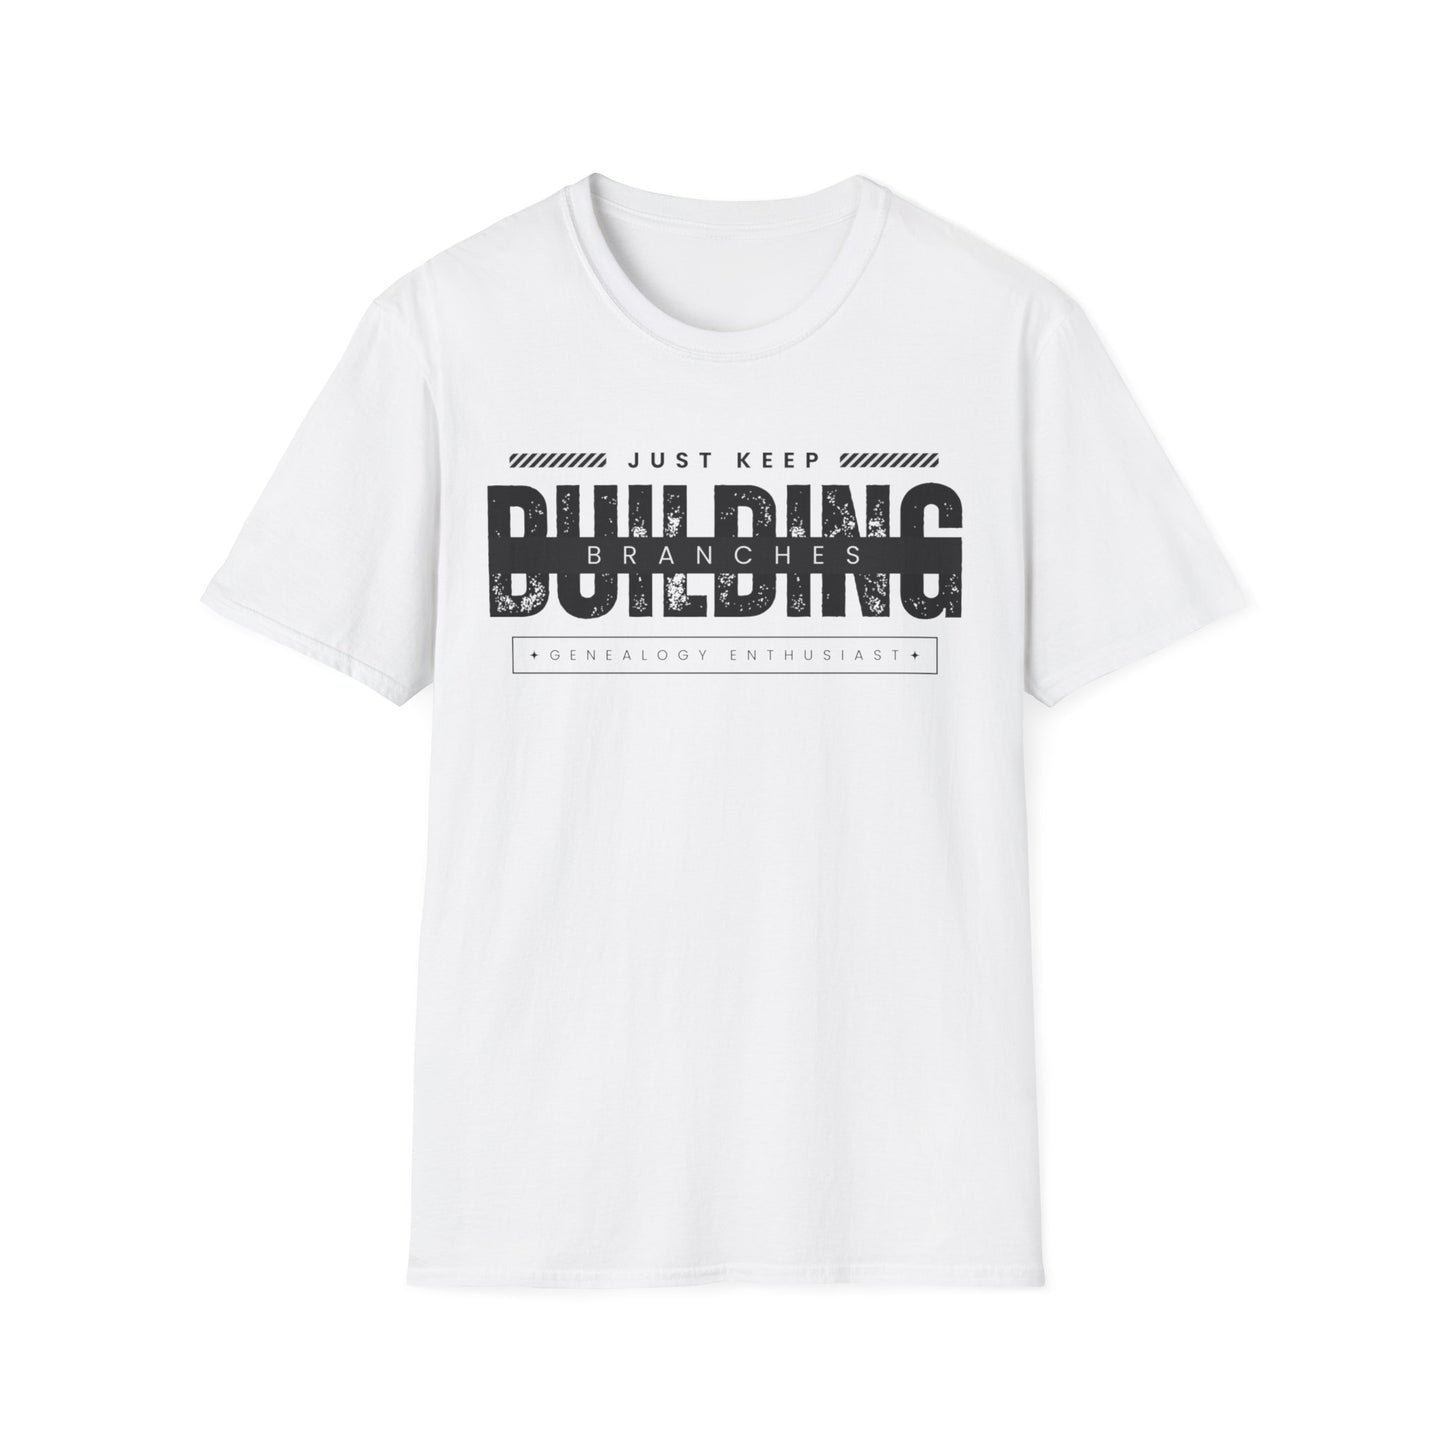 Just Keep Building Branches Genealogy T-Shirt